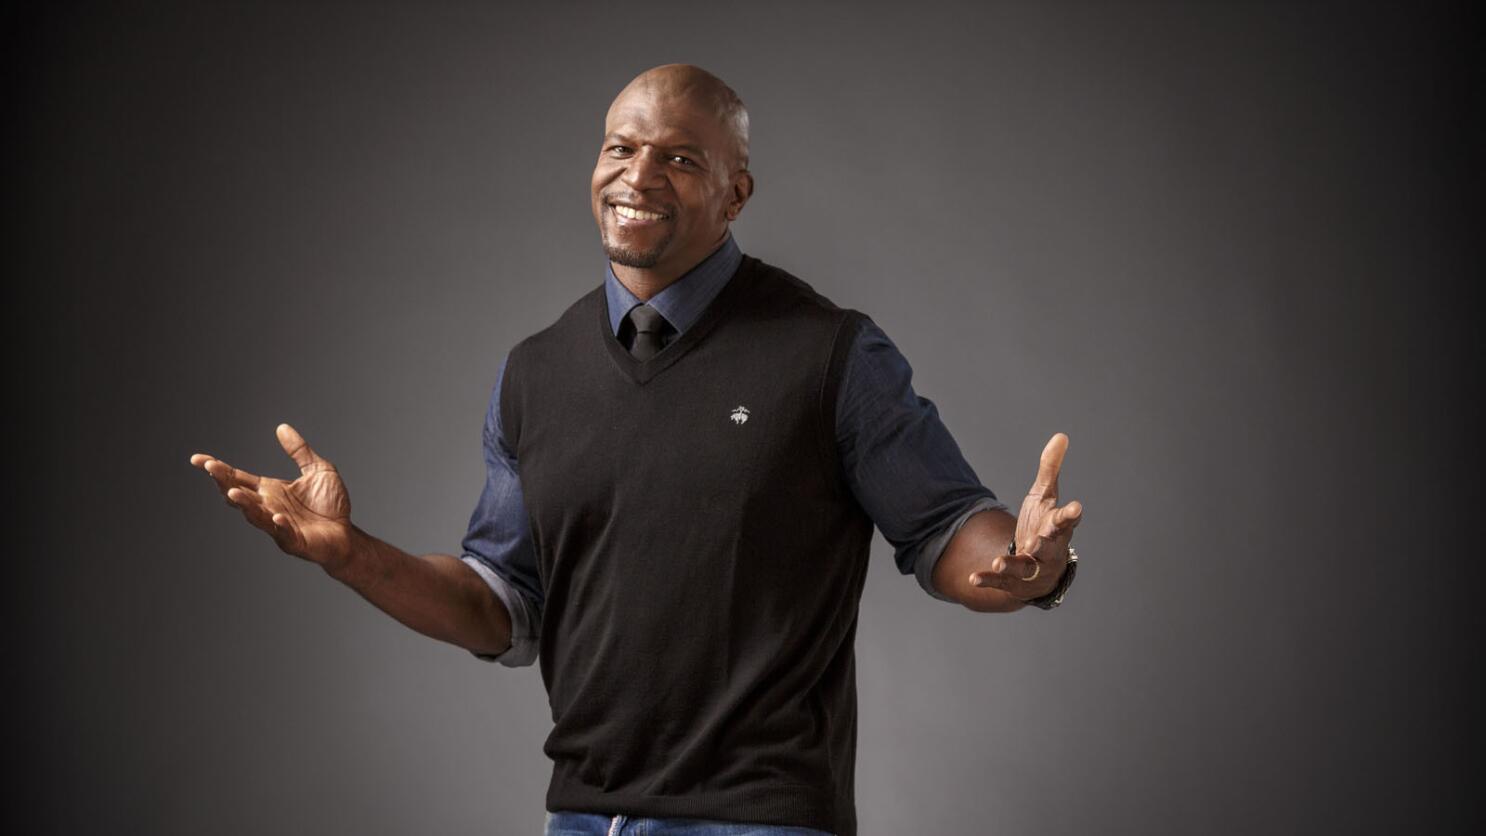 Which sequel would you rather see Terry Crews in: 'Last Friday' or